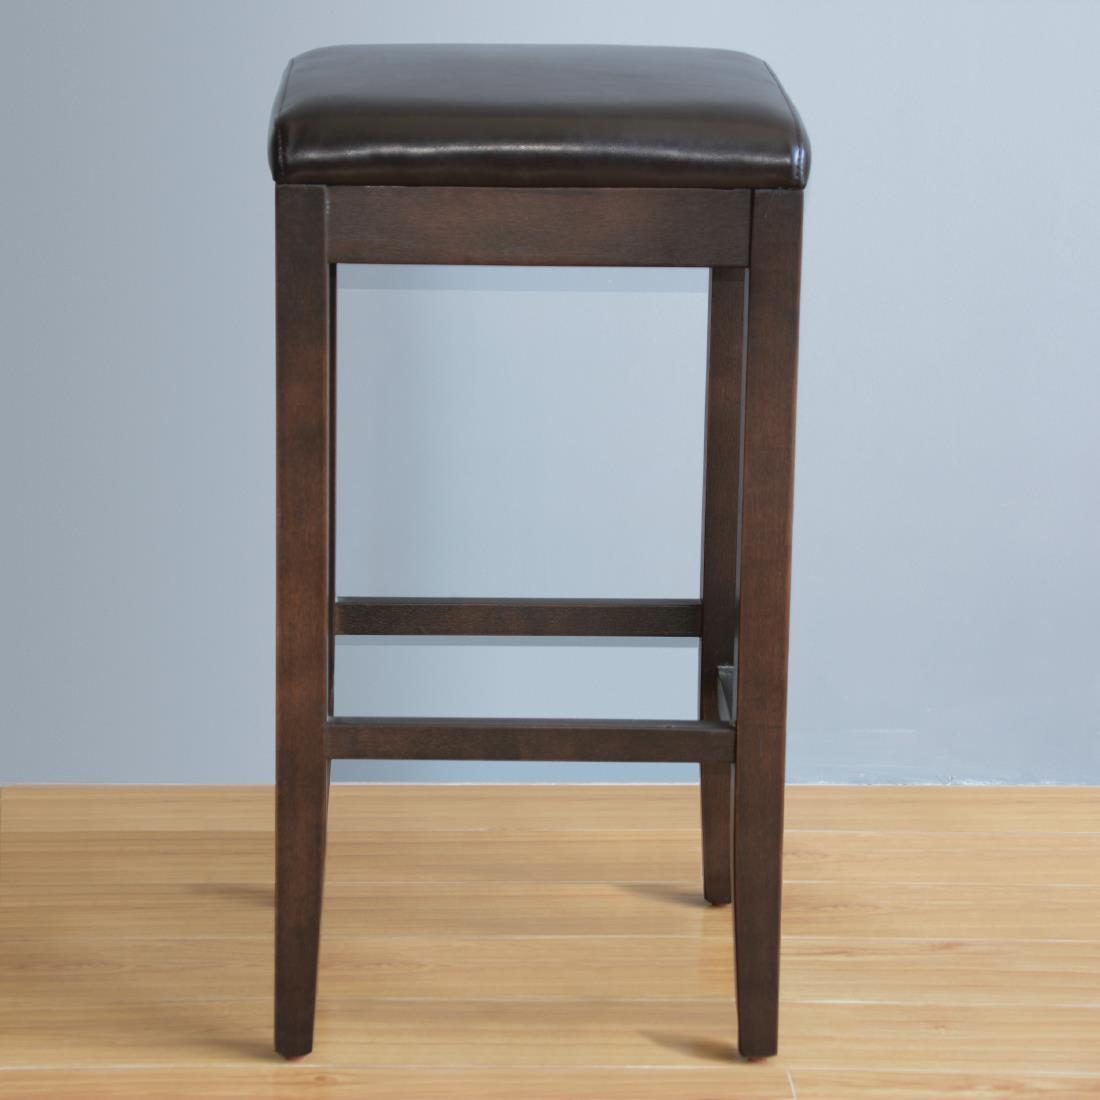 Bolero Faux Leather High Bar Stools Dark Brown (Pack of 2) - GG649  - 5